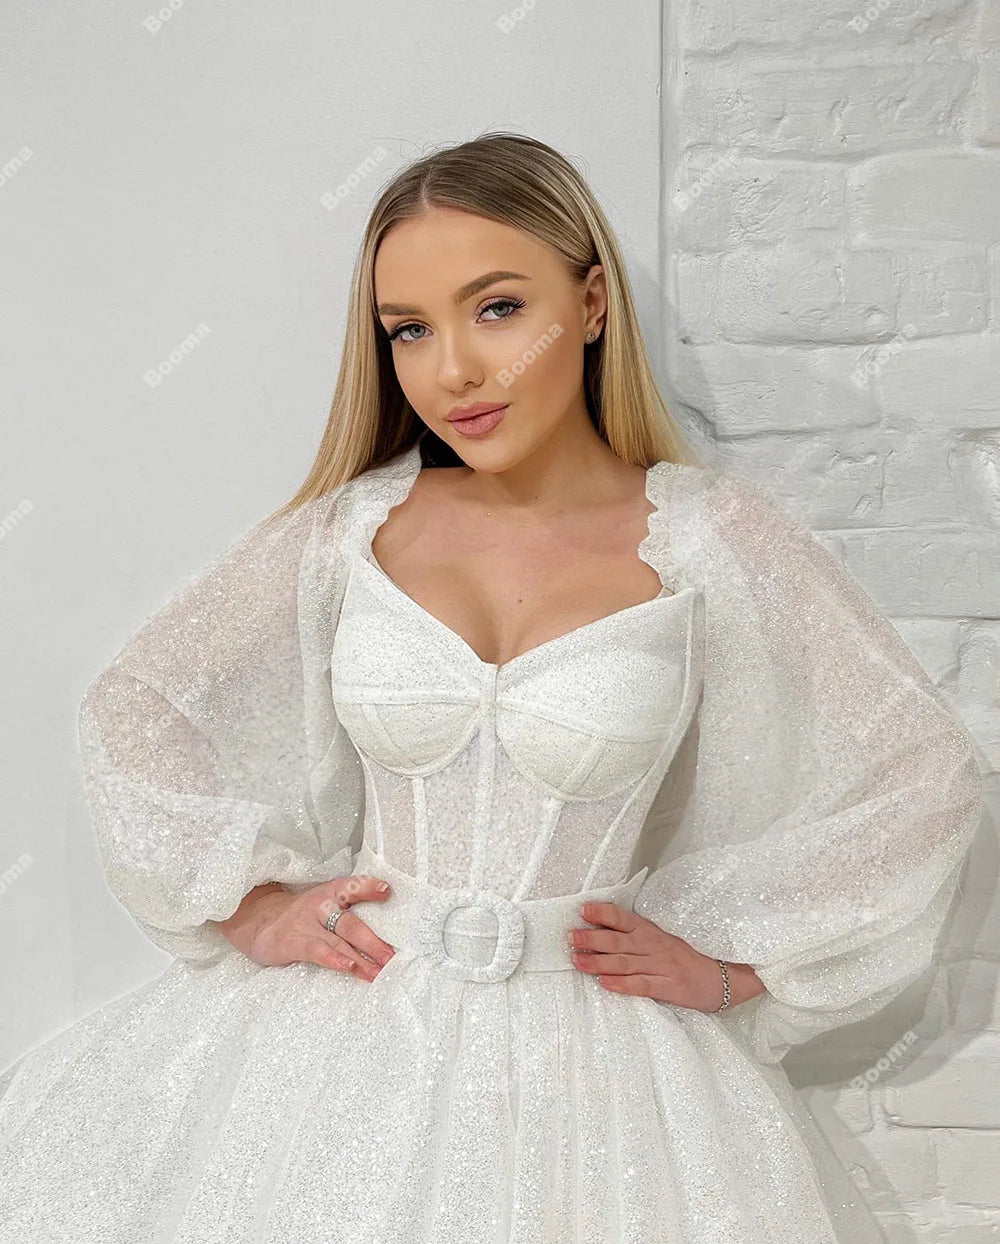 Shiny A Line Short Women Wedding Party Dresses Off Shoulder Boning Corset Long Puff Sleeves Bridal Party Gowns Prom Dress